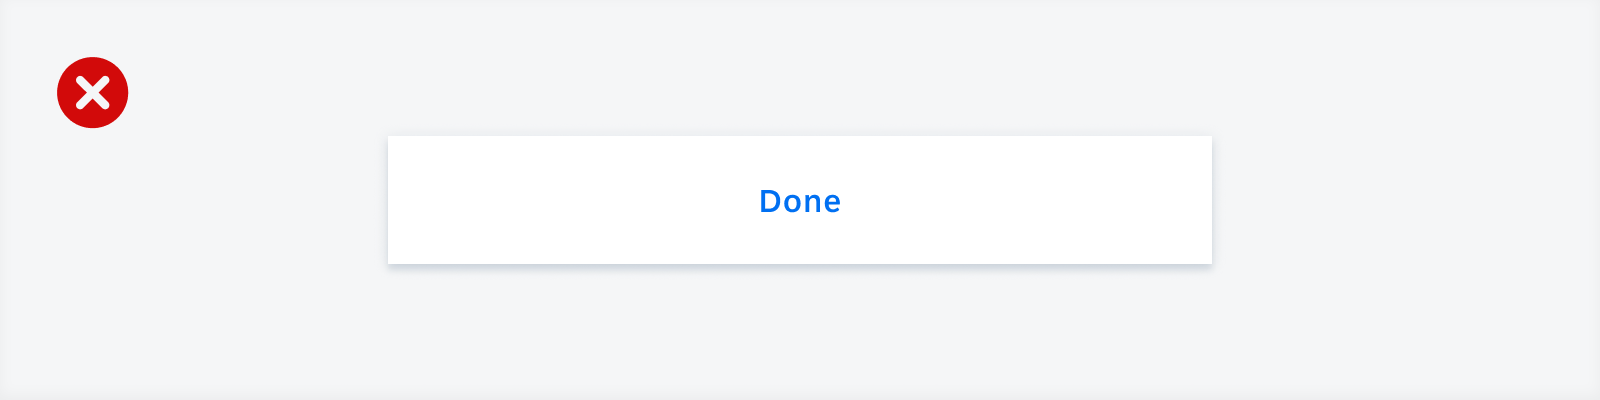 Negative example of using a text button that is responsive to the complete width of the persistent footer container